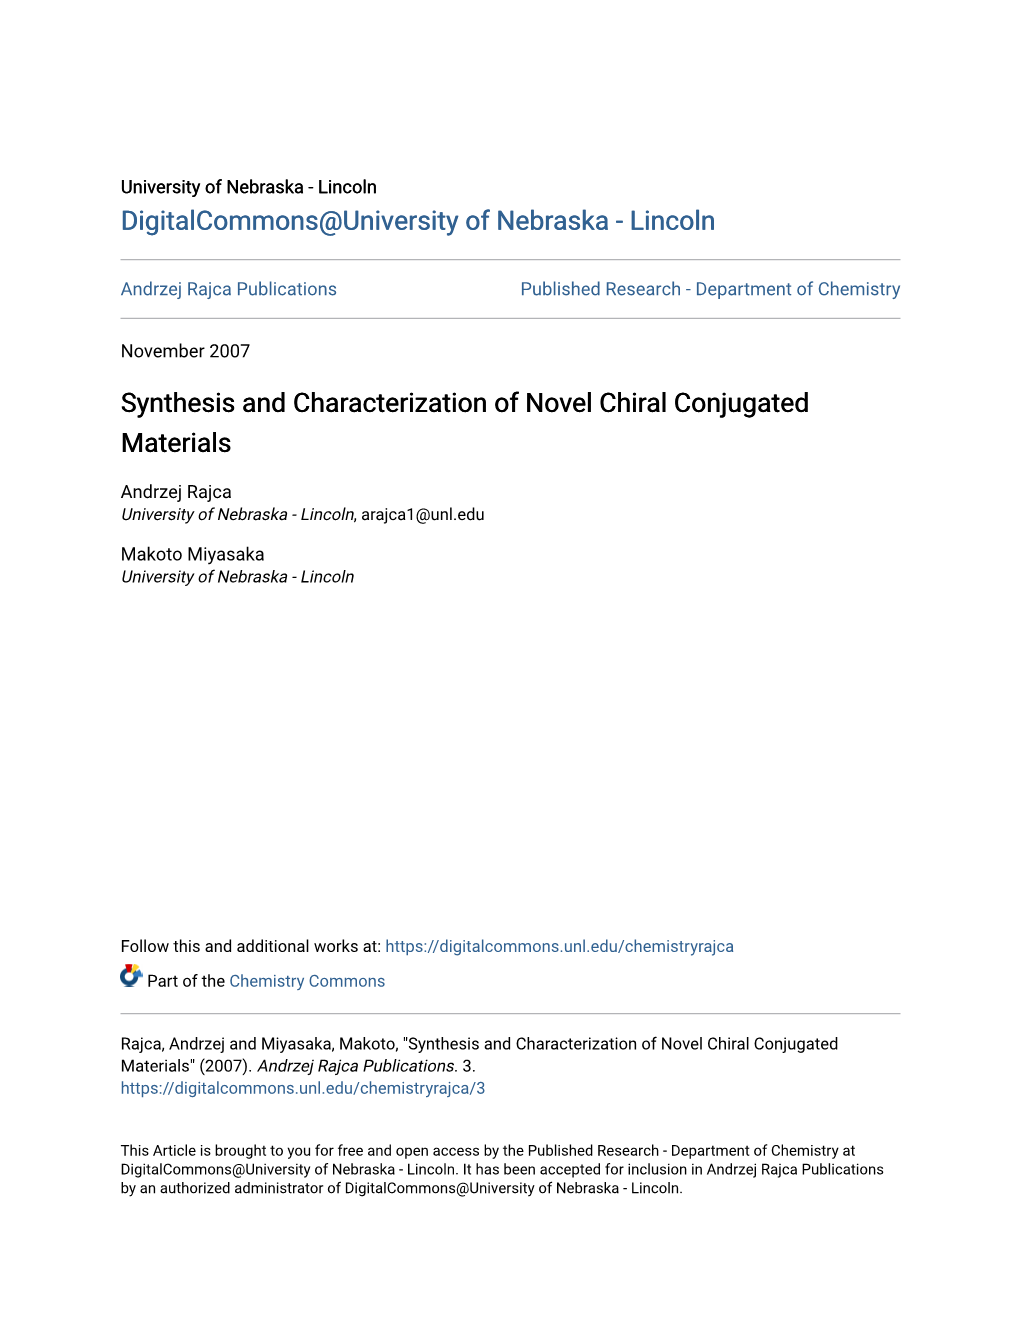 Synthesis and Characterization of Novel Chiral Conjugated Materials